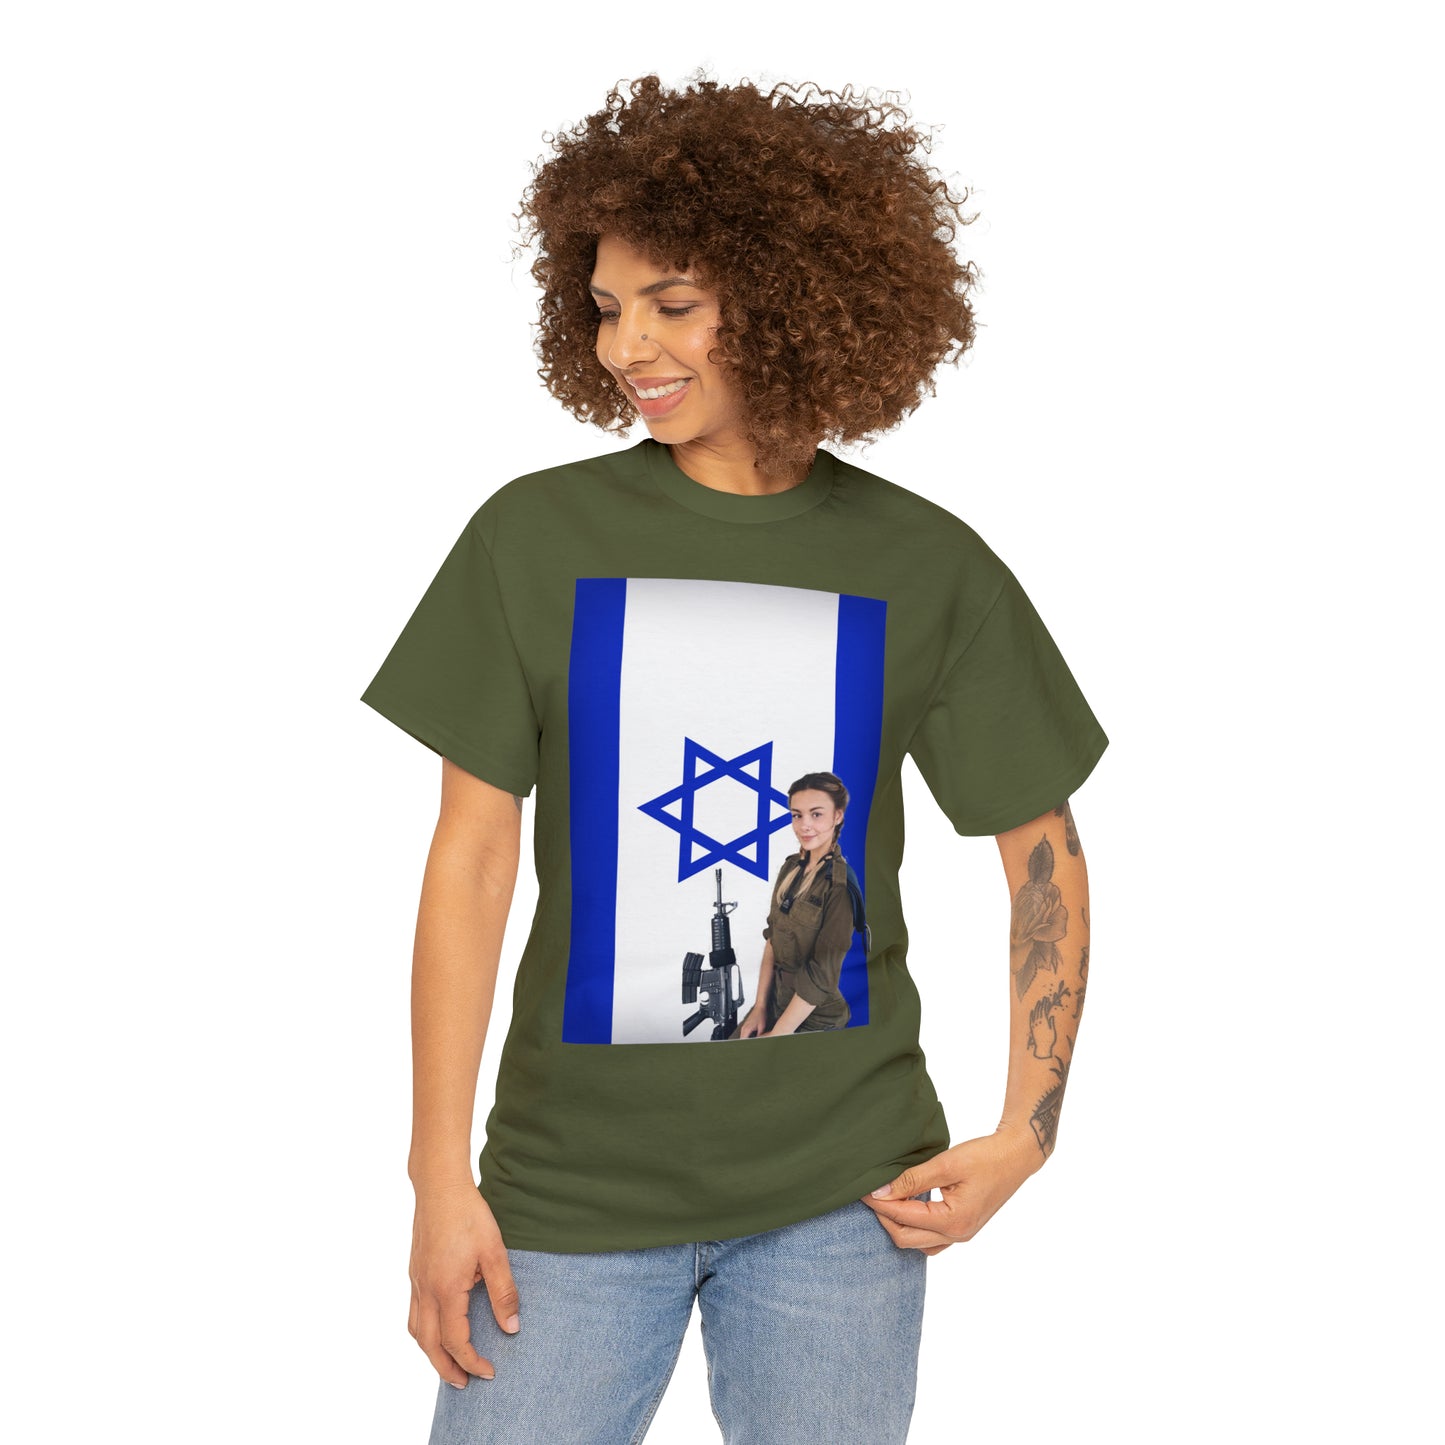 IDF Female Soldier - Hurts Shirts Collection